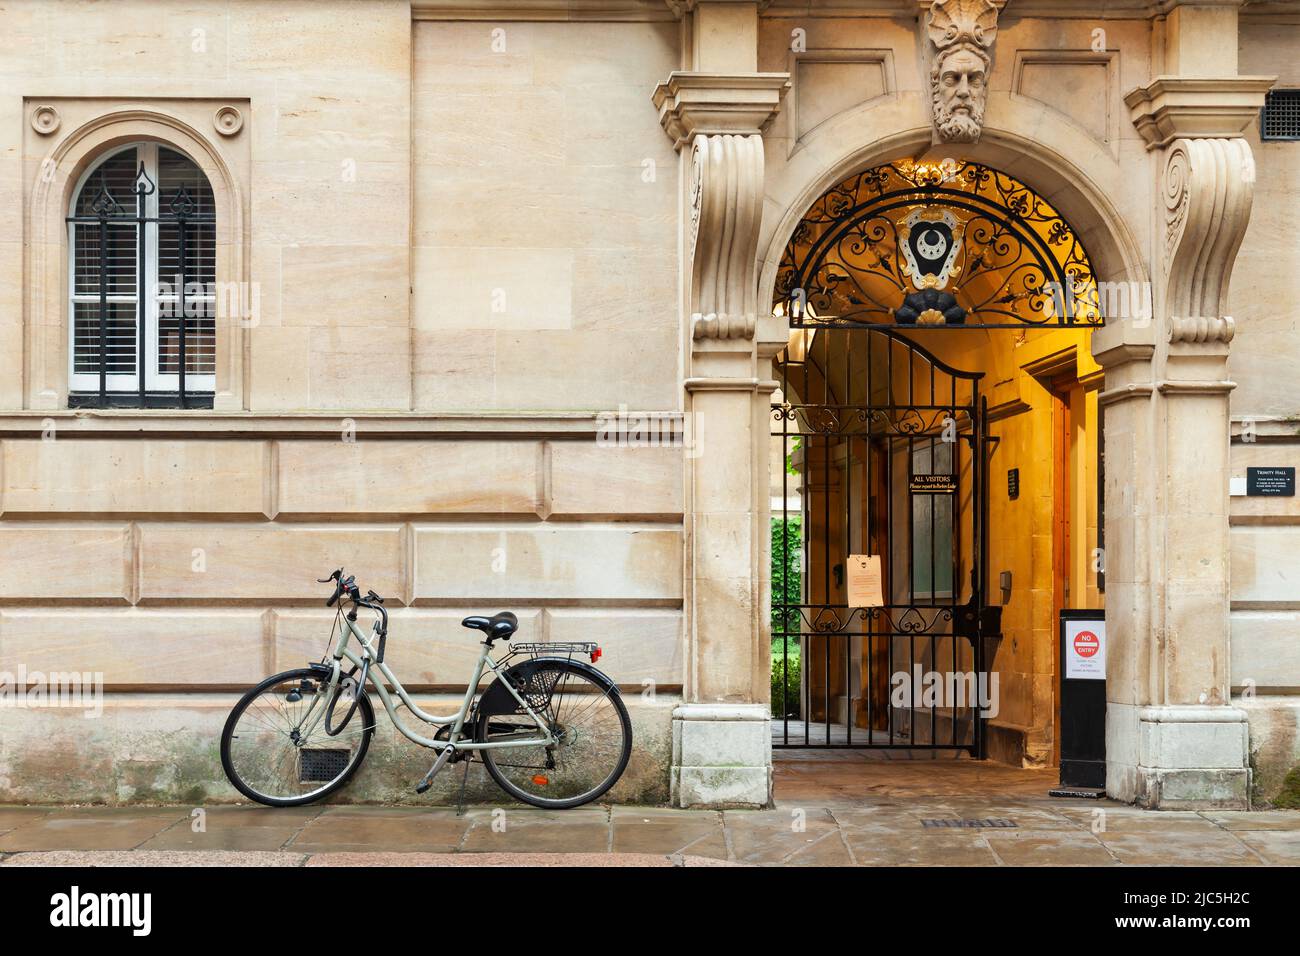 Bicycle parked on the street in Cambridge, England. Stock Photo